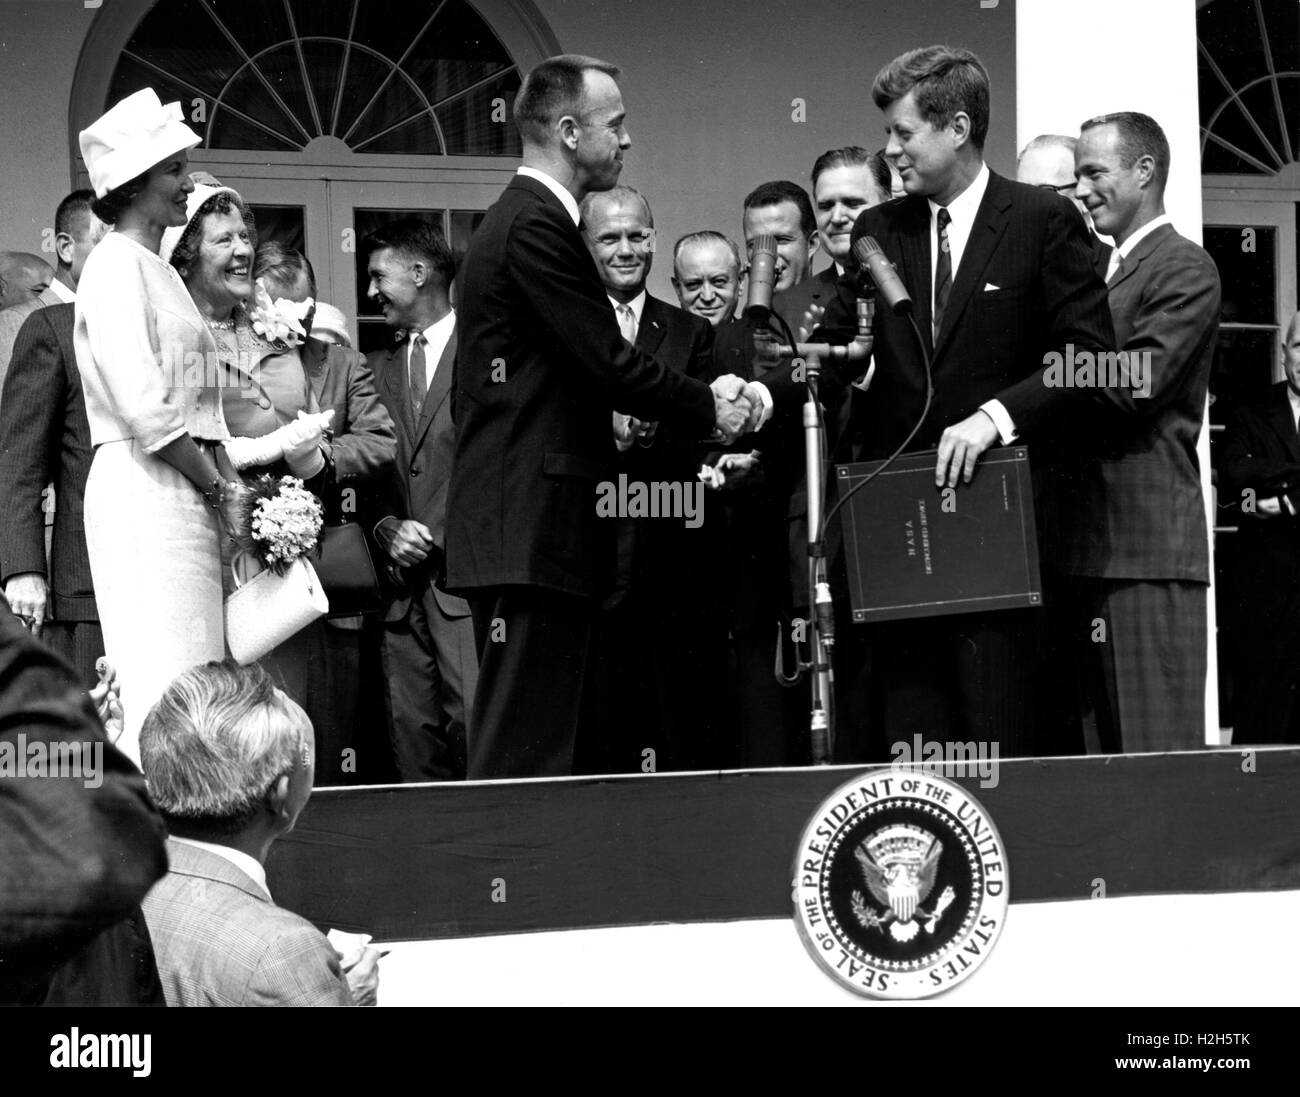 U.S. President John F. Kennedy presents astronaut Alan B. Shepard, Jr. with the NASA Distinguished Service Award in a ceremony on the White House lawn May 8, 1961 in Washington, D.C. Shepard was the first American in space during his historic Freedom 7 Spacecraft ride. Stock Photo